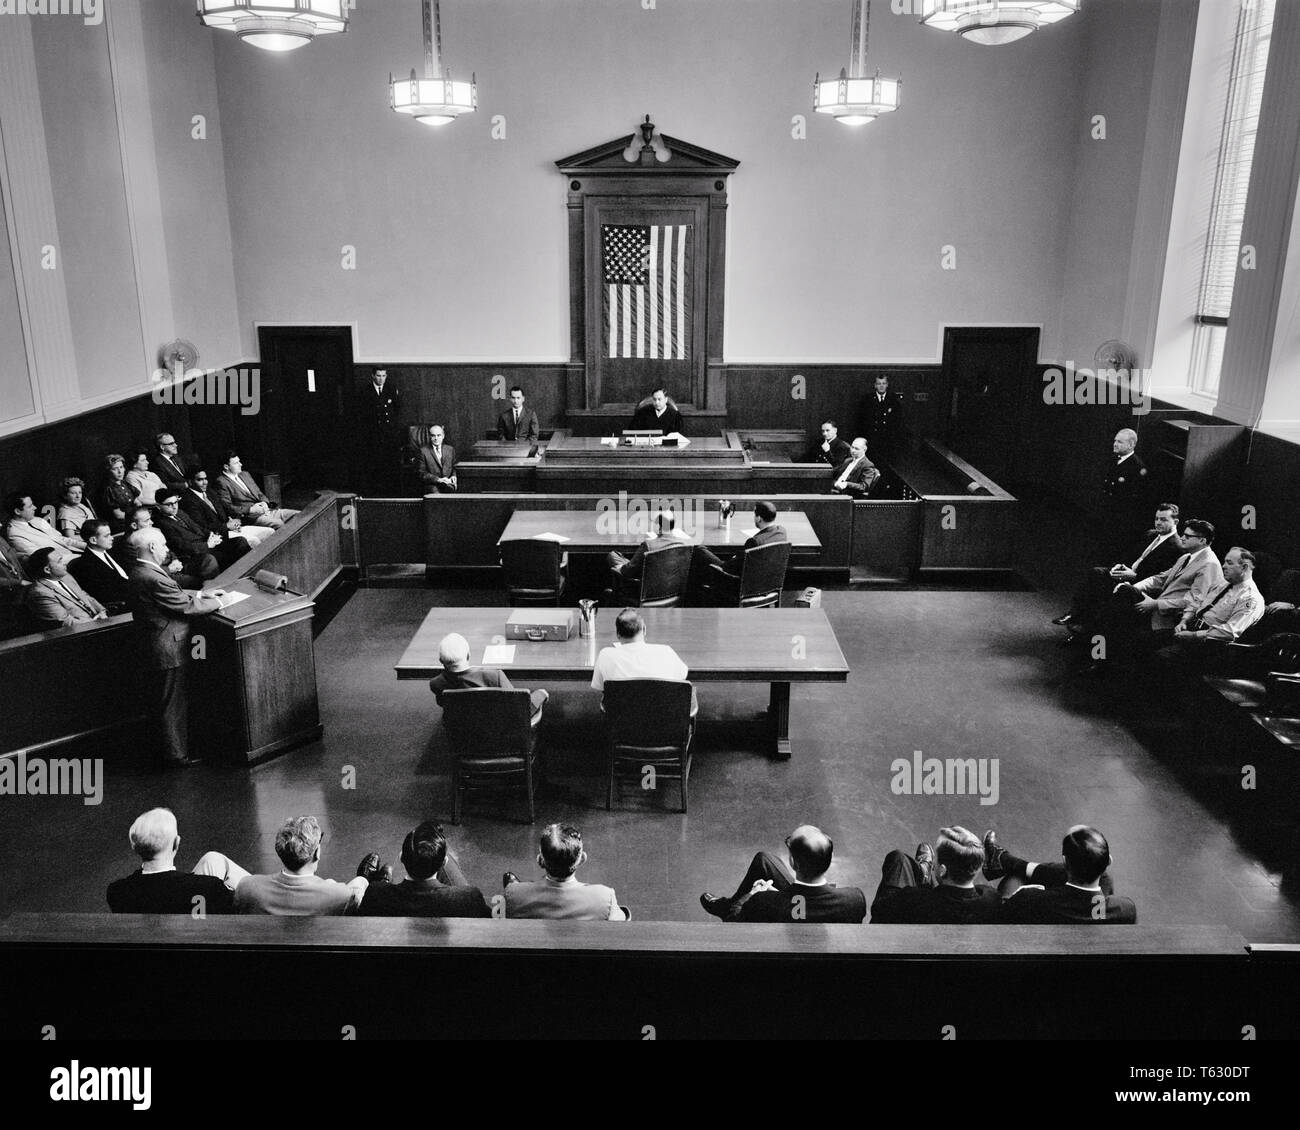 1960s COURTROOM AMERICAN FLAG HANGING BEHIND JUDGE JURY ON RIGHT LAWYER AT LECTERN SPEAKING - s12370 HAR001 HARS LADIES PERSONS INSPIRATION UNITED STATES OF AMERICA MALES B&W GOVERNMENT TABLES FREEDOM HEAD AND SHOULDERS HIGH ANGLE DISCOVERY STRATEGY JUDICIAL LAWYERS POWERFUL JUDGMENT RIGHTS ATTORNEYS AUTHORITY POLITICS RIGHT CONCEPTUAL PROSECUTION ARCHITECTURAL DETAIL ATTORNEY COOPERATION DEFENSE DEMOCRACY IDEAS LECTERN TOGETHERNESS BLACK AND WHITE CAUCASIAN ETHNICITY FREEDOMS HAR001 OLD FASHIONED Stock Photo